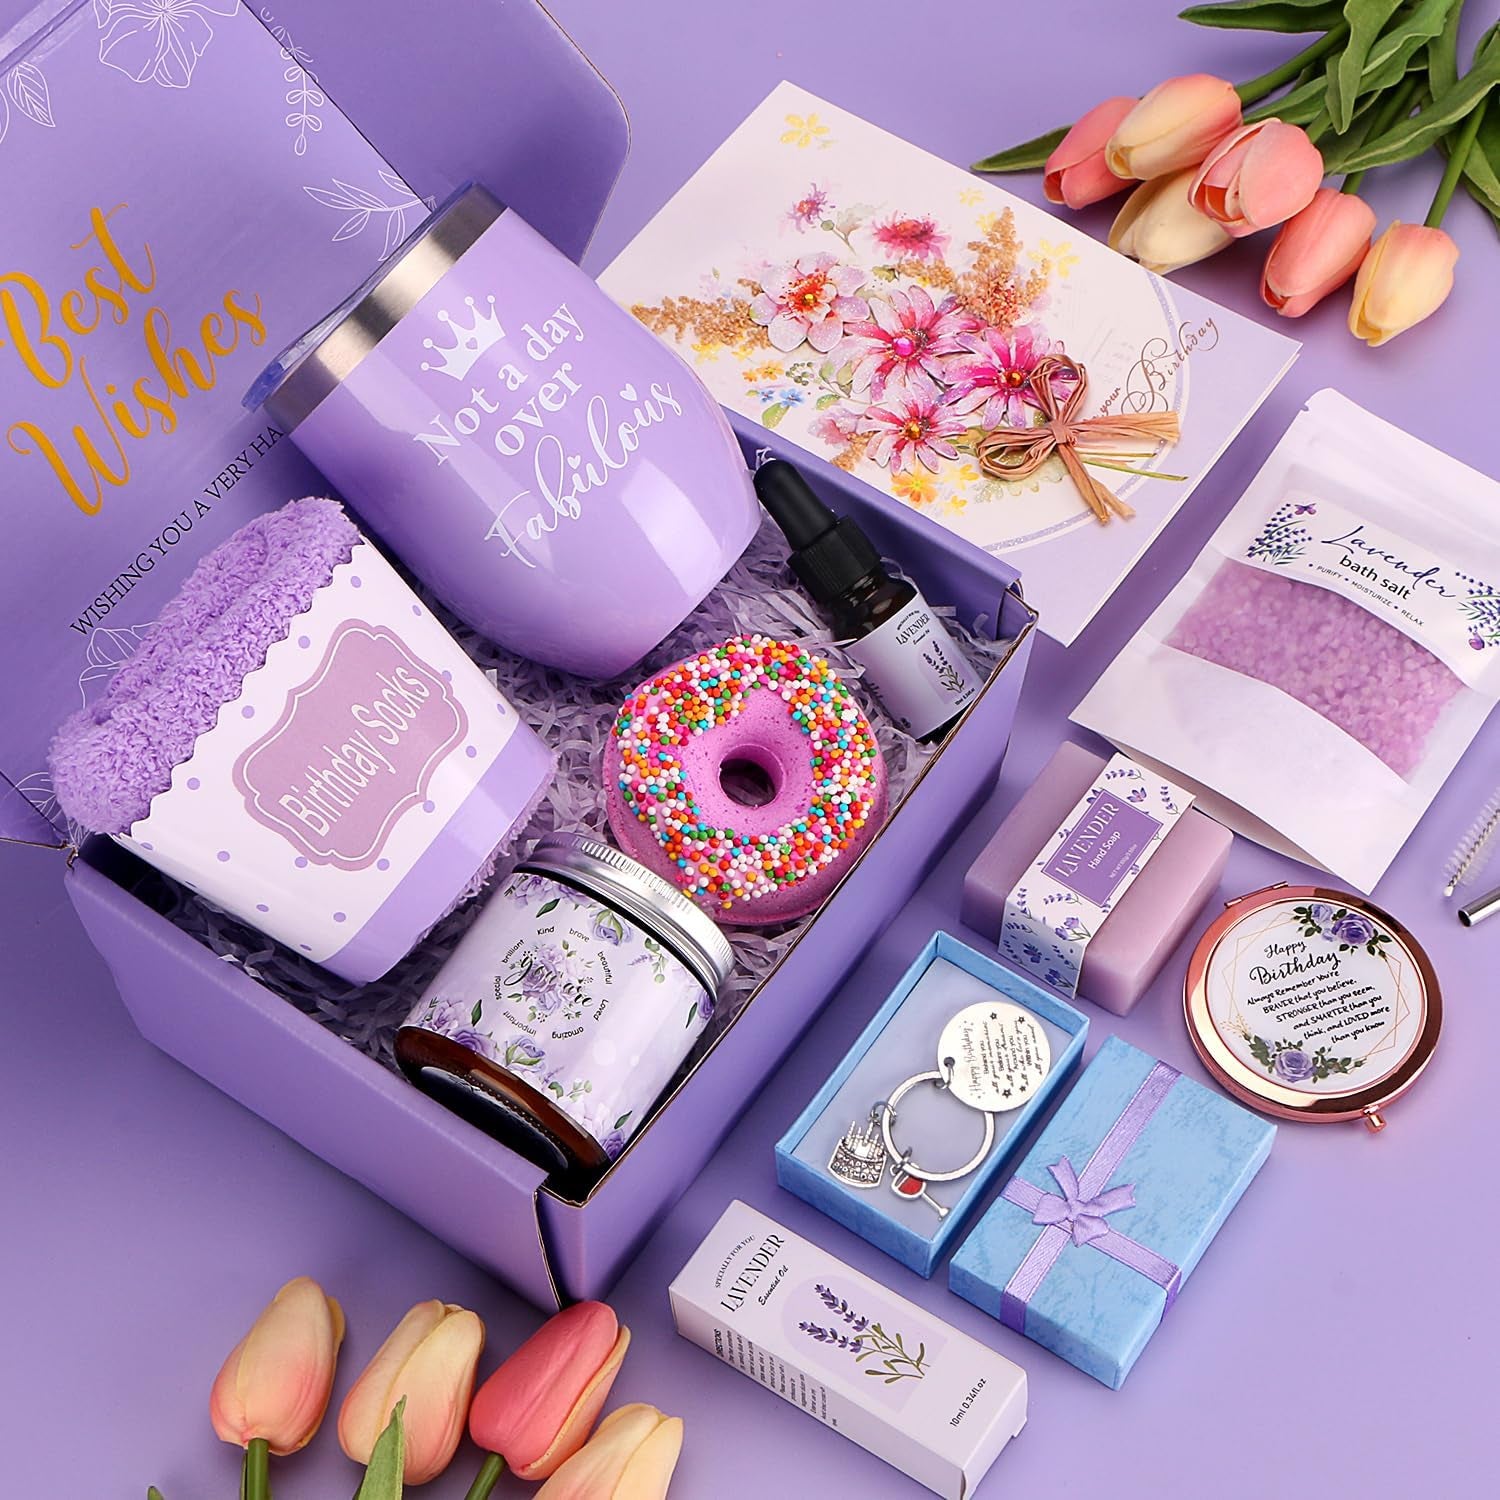 Birthday Gifts for Women, Lavender Happy Birthday Pamper Hampers Self Care Package for Her Mum Best Friend Sister Wife Daughter, Female Relaxation Birthday Presents for 18Th 21St 30Th 40Th 50Th 60Th